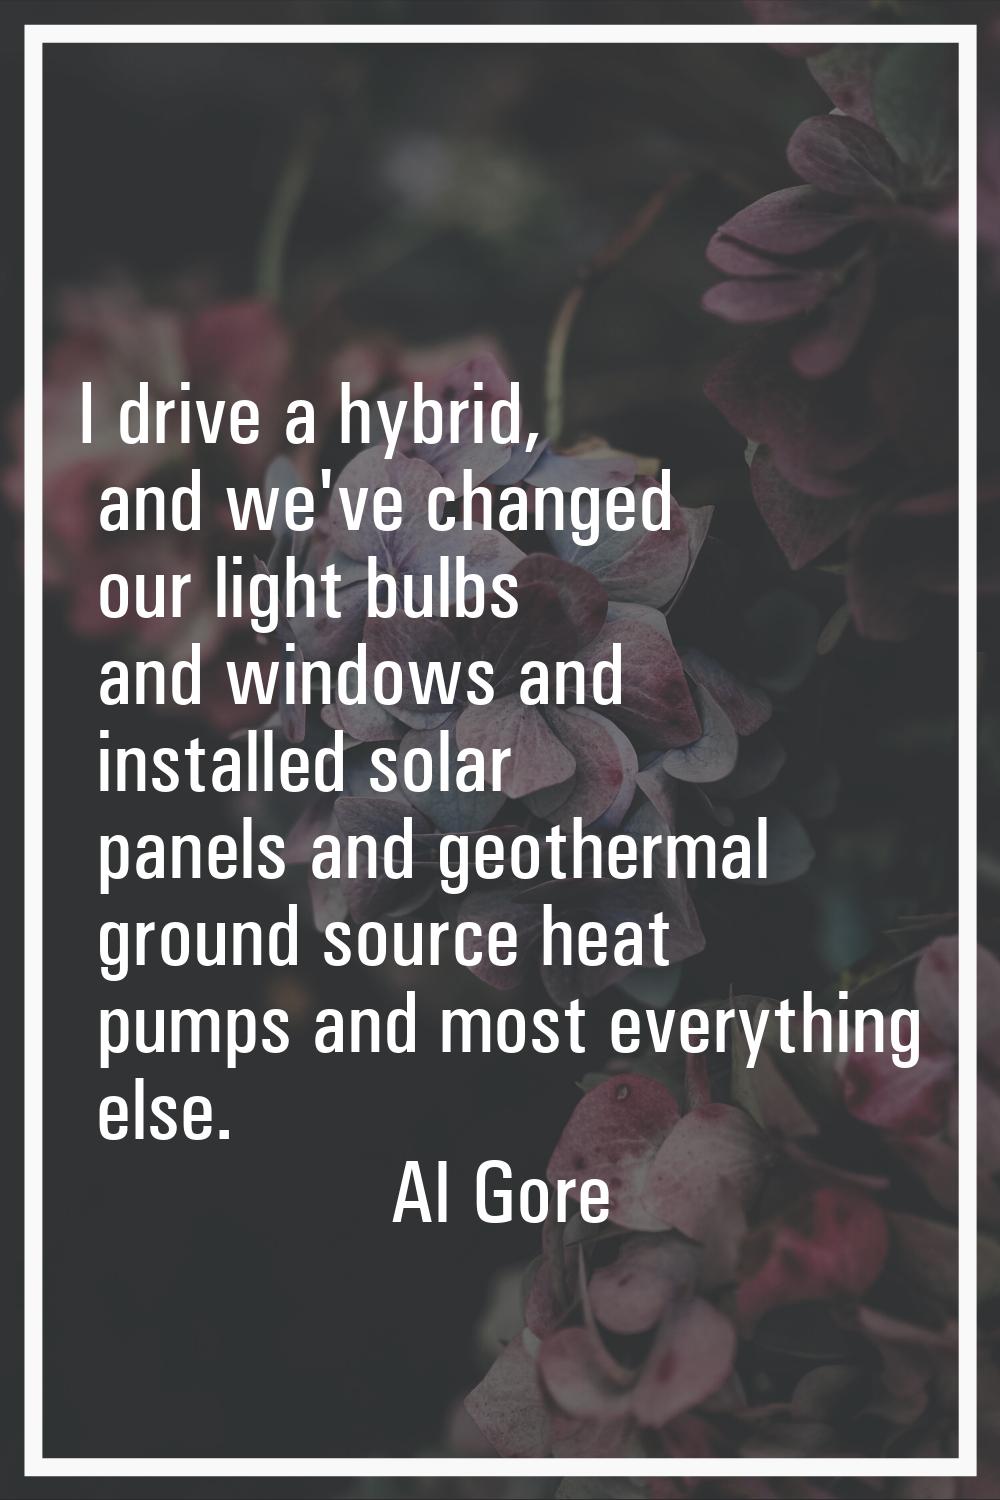 I drive a hybrid, and we've changed our light bulbs and windows and installed solar panels and geot